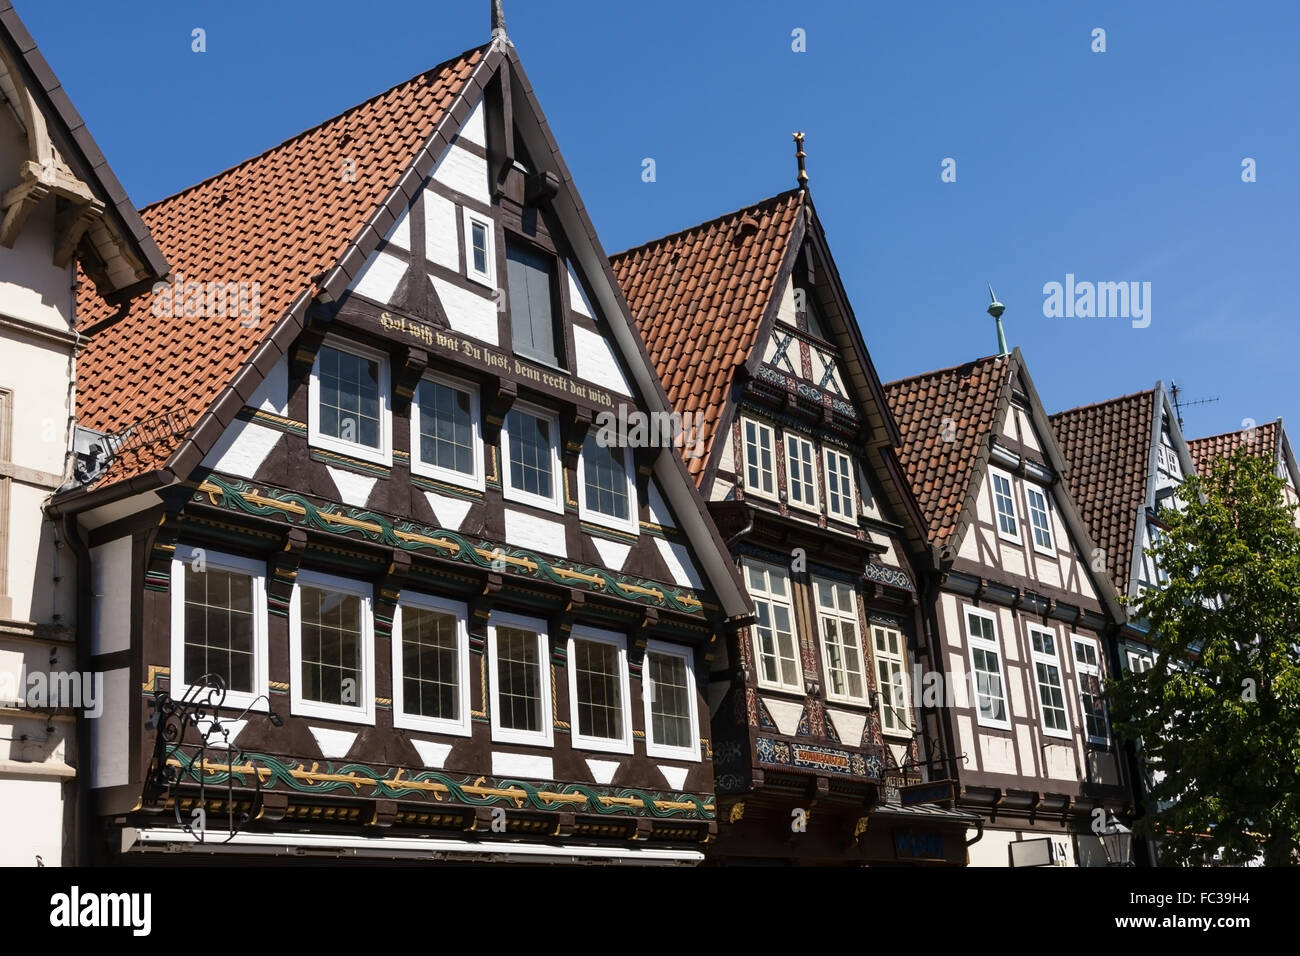 Half-timbered Houses in Celle, Germany Stock Photo